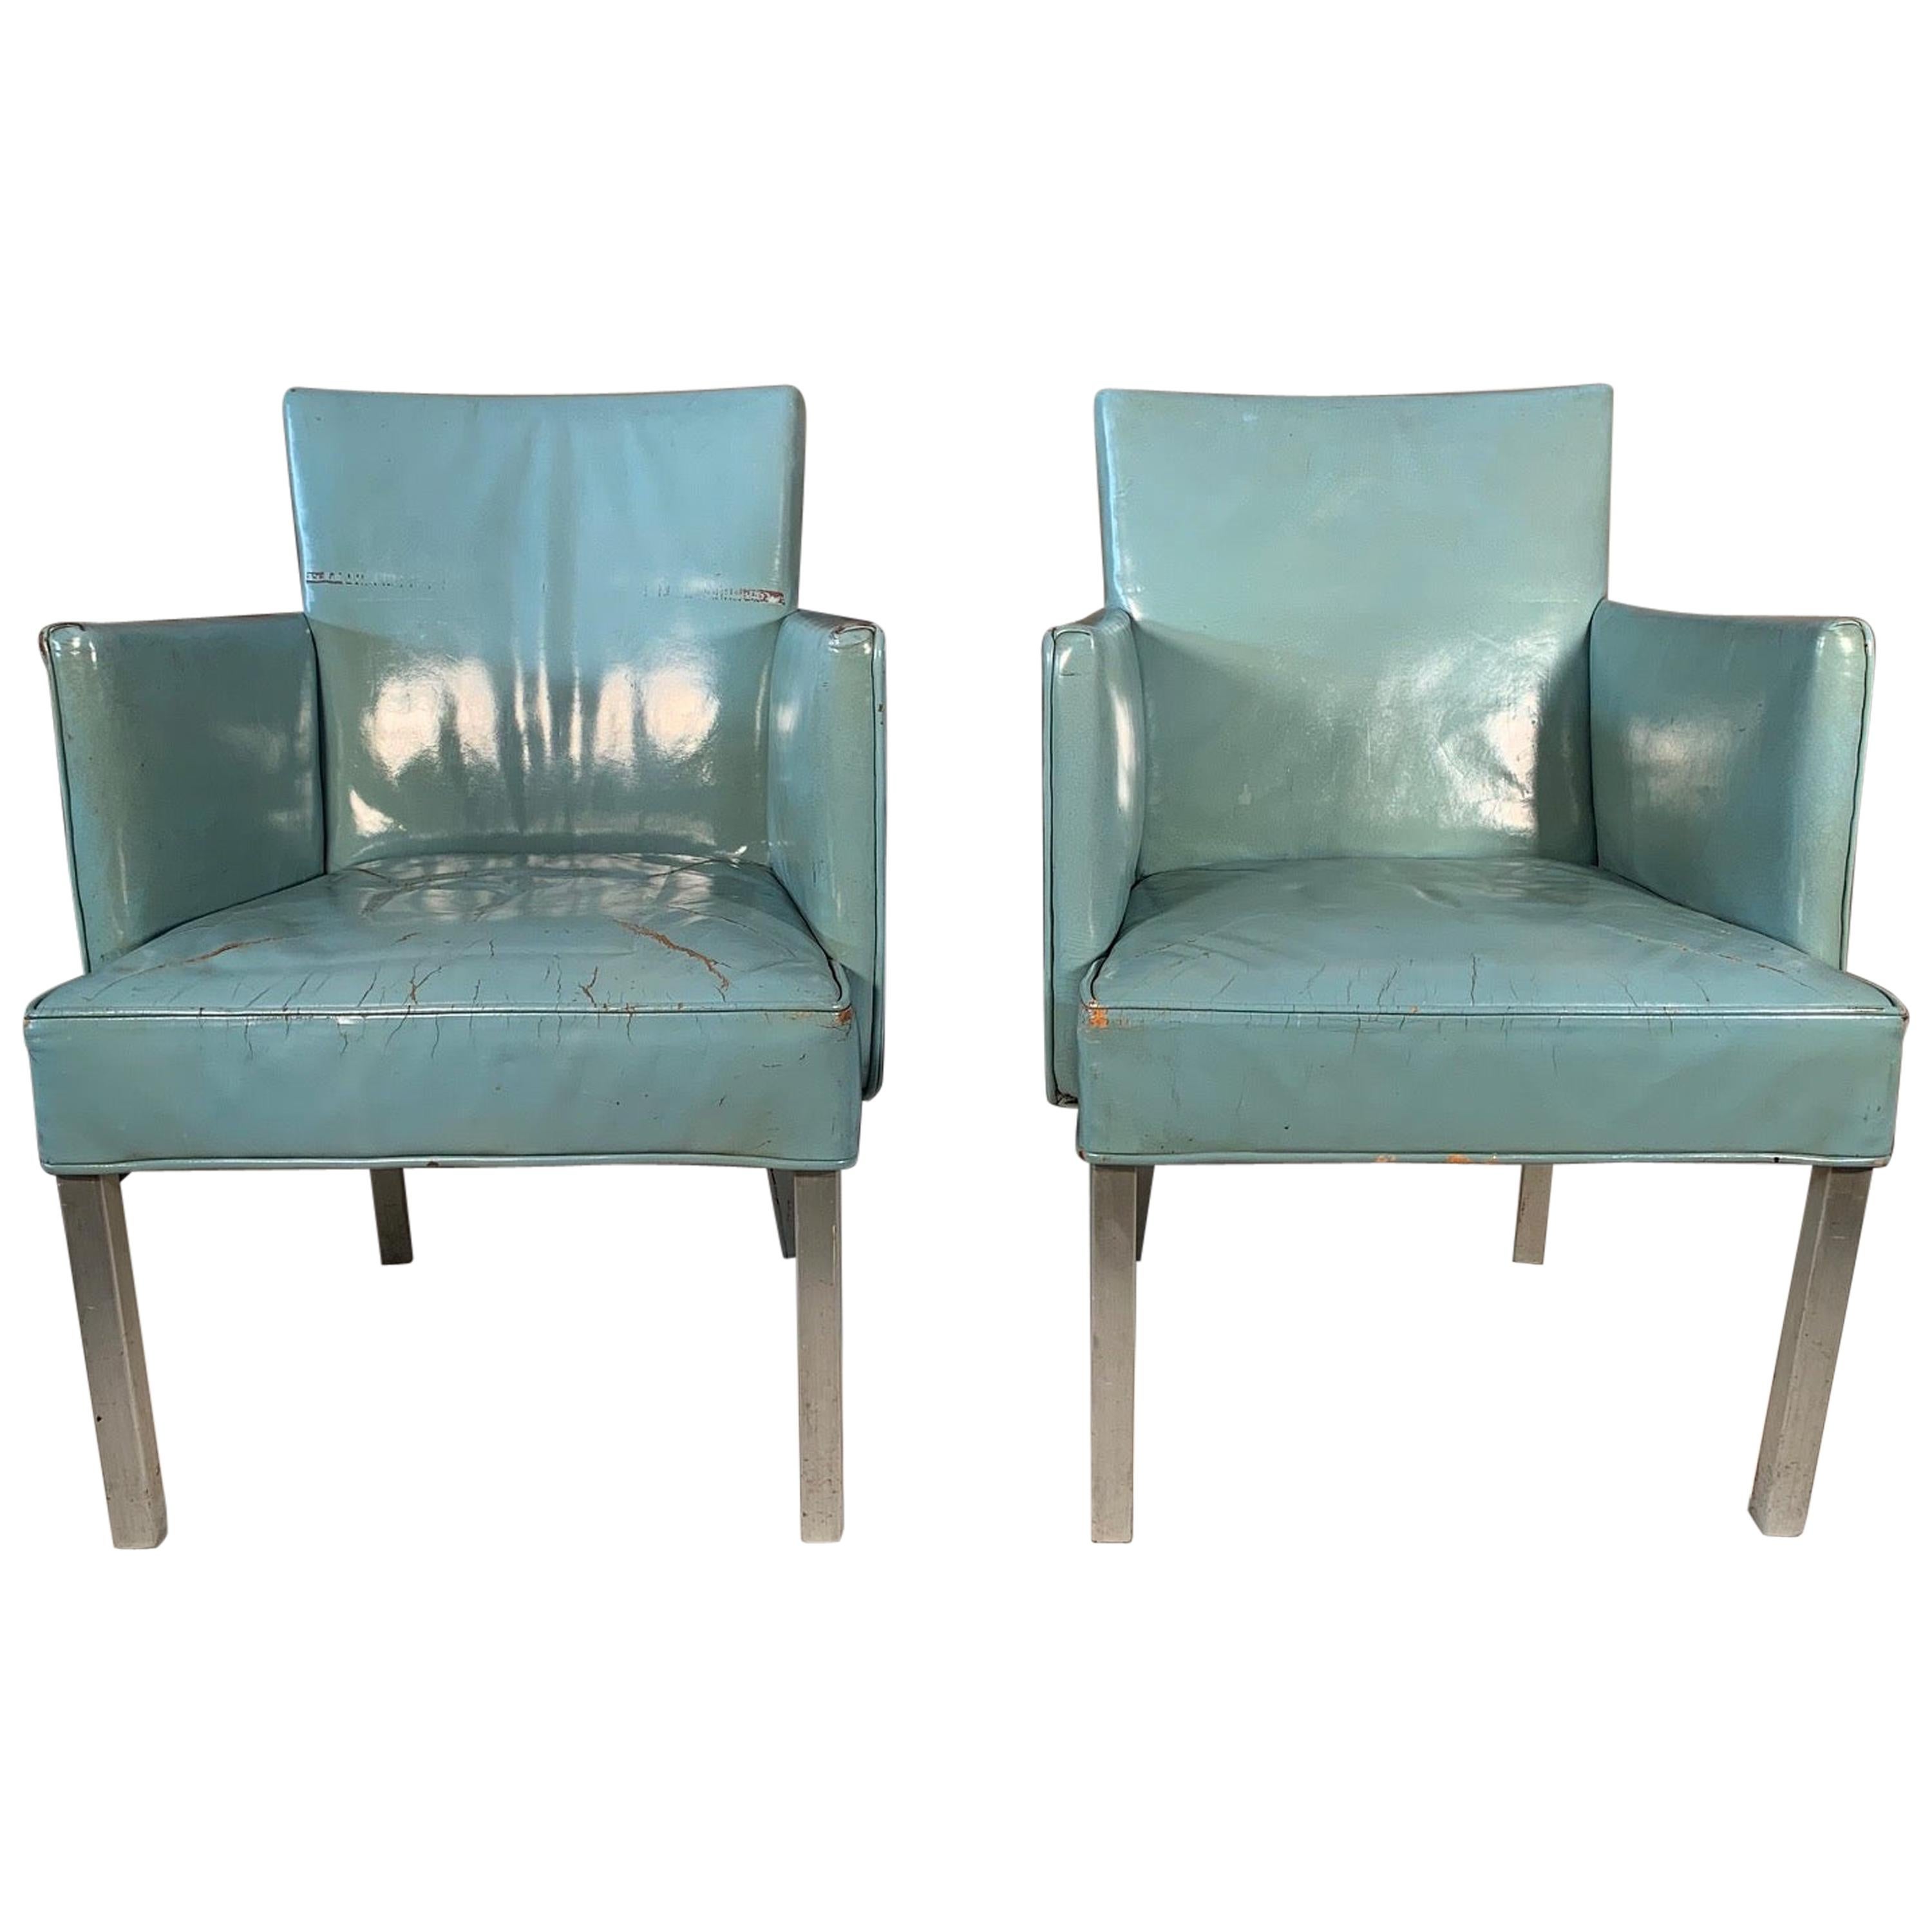 Pair of Unusual Armchairs from S.S. United States Ocean Liner